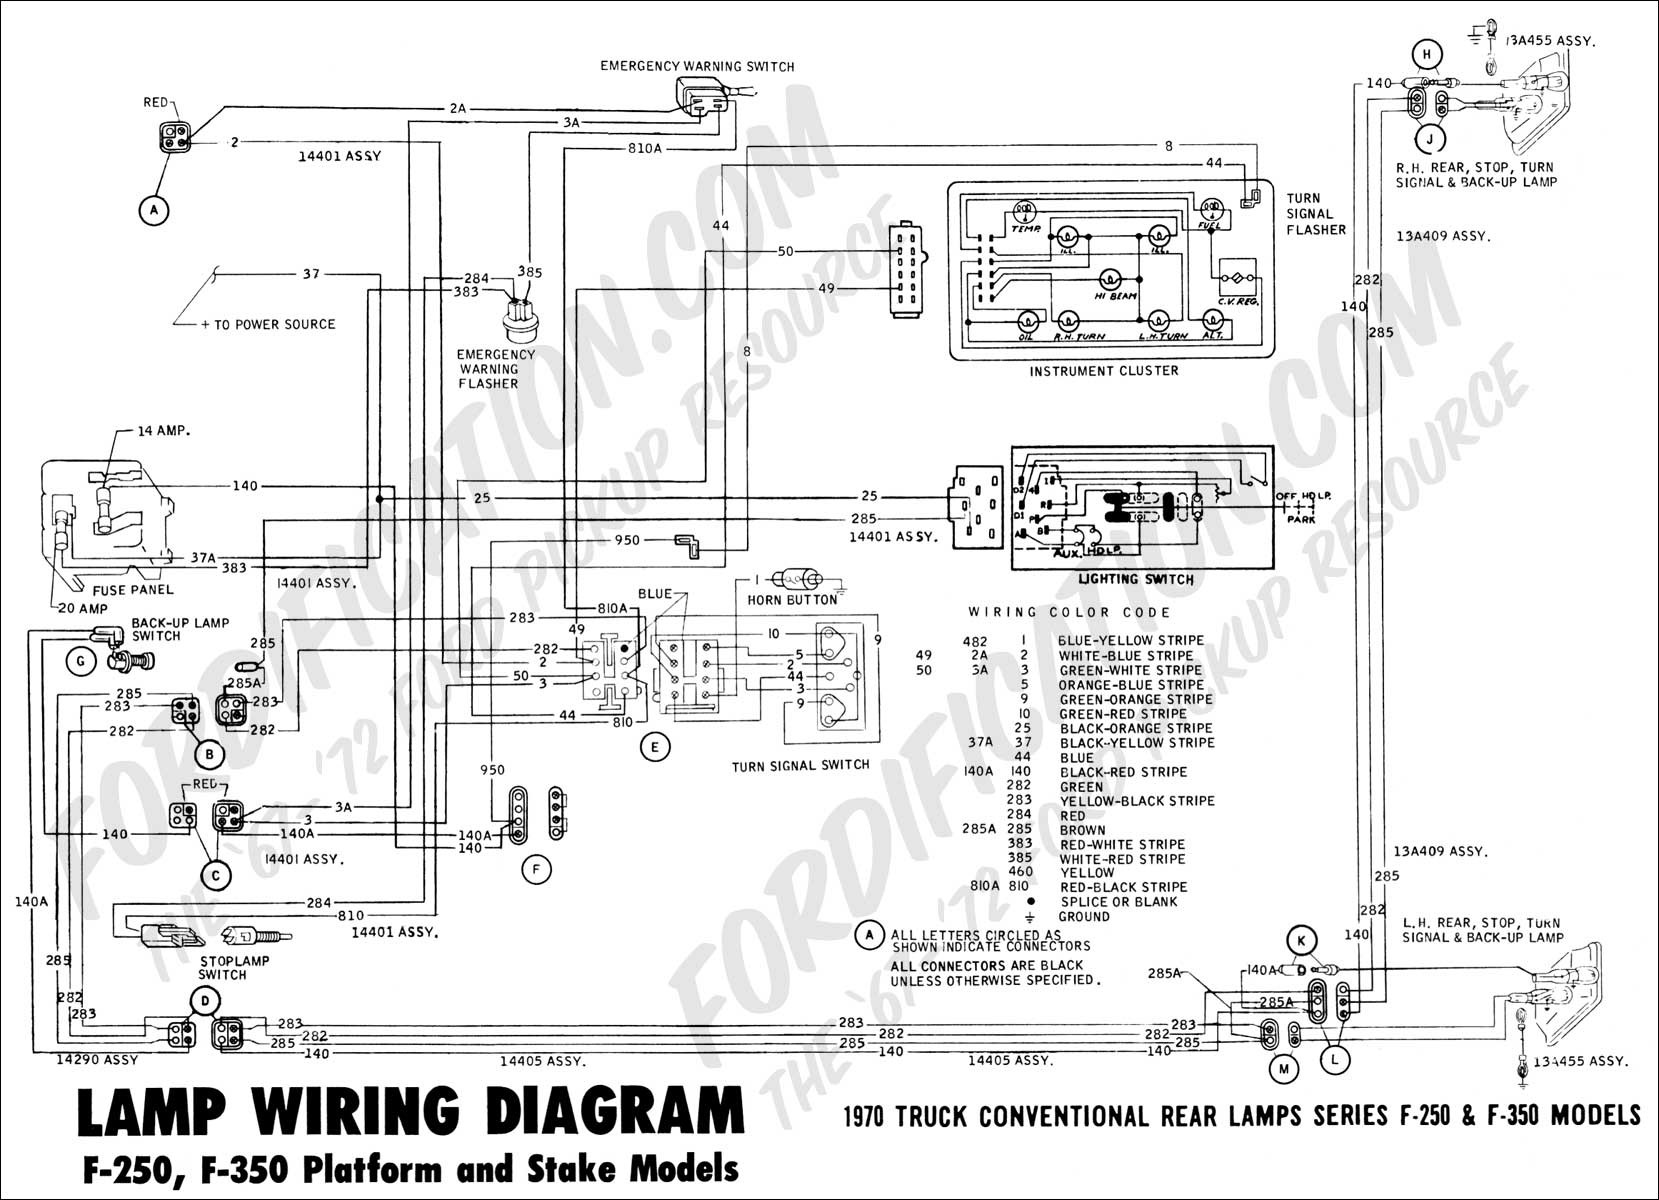 1994 ford F150 Wiring Diagram ford Truck Technical Drawings and Schematics Section H Wiring Of 1994 ford F150 Wiring Diagram